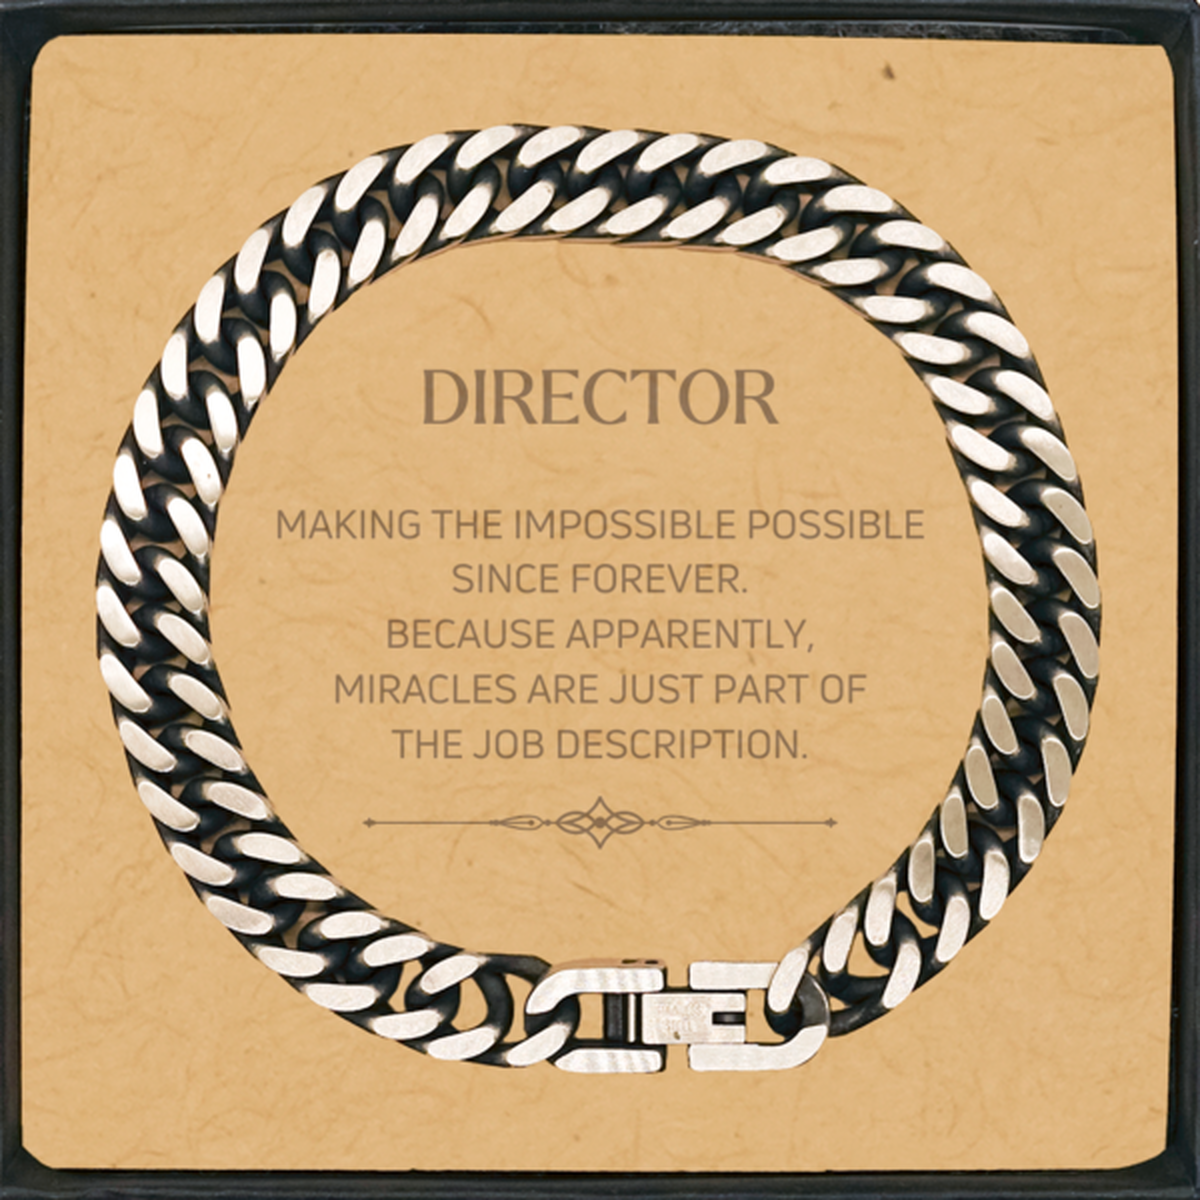 Funny Director Gifts, Miracles are just part of the job description, Inspirational Birthday Cuban Link Chain Bracelet For Director, Men, Women, Coworkers, Friends, Boss